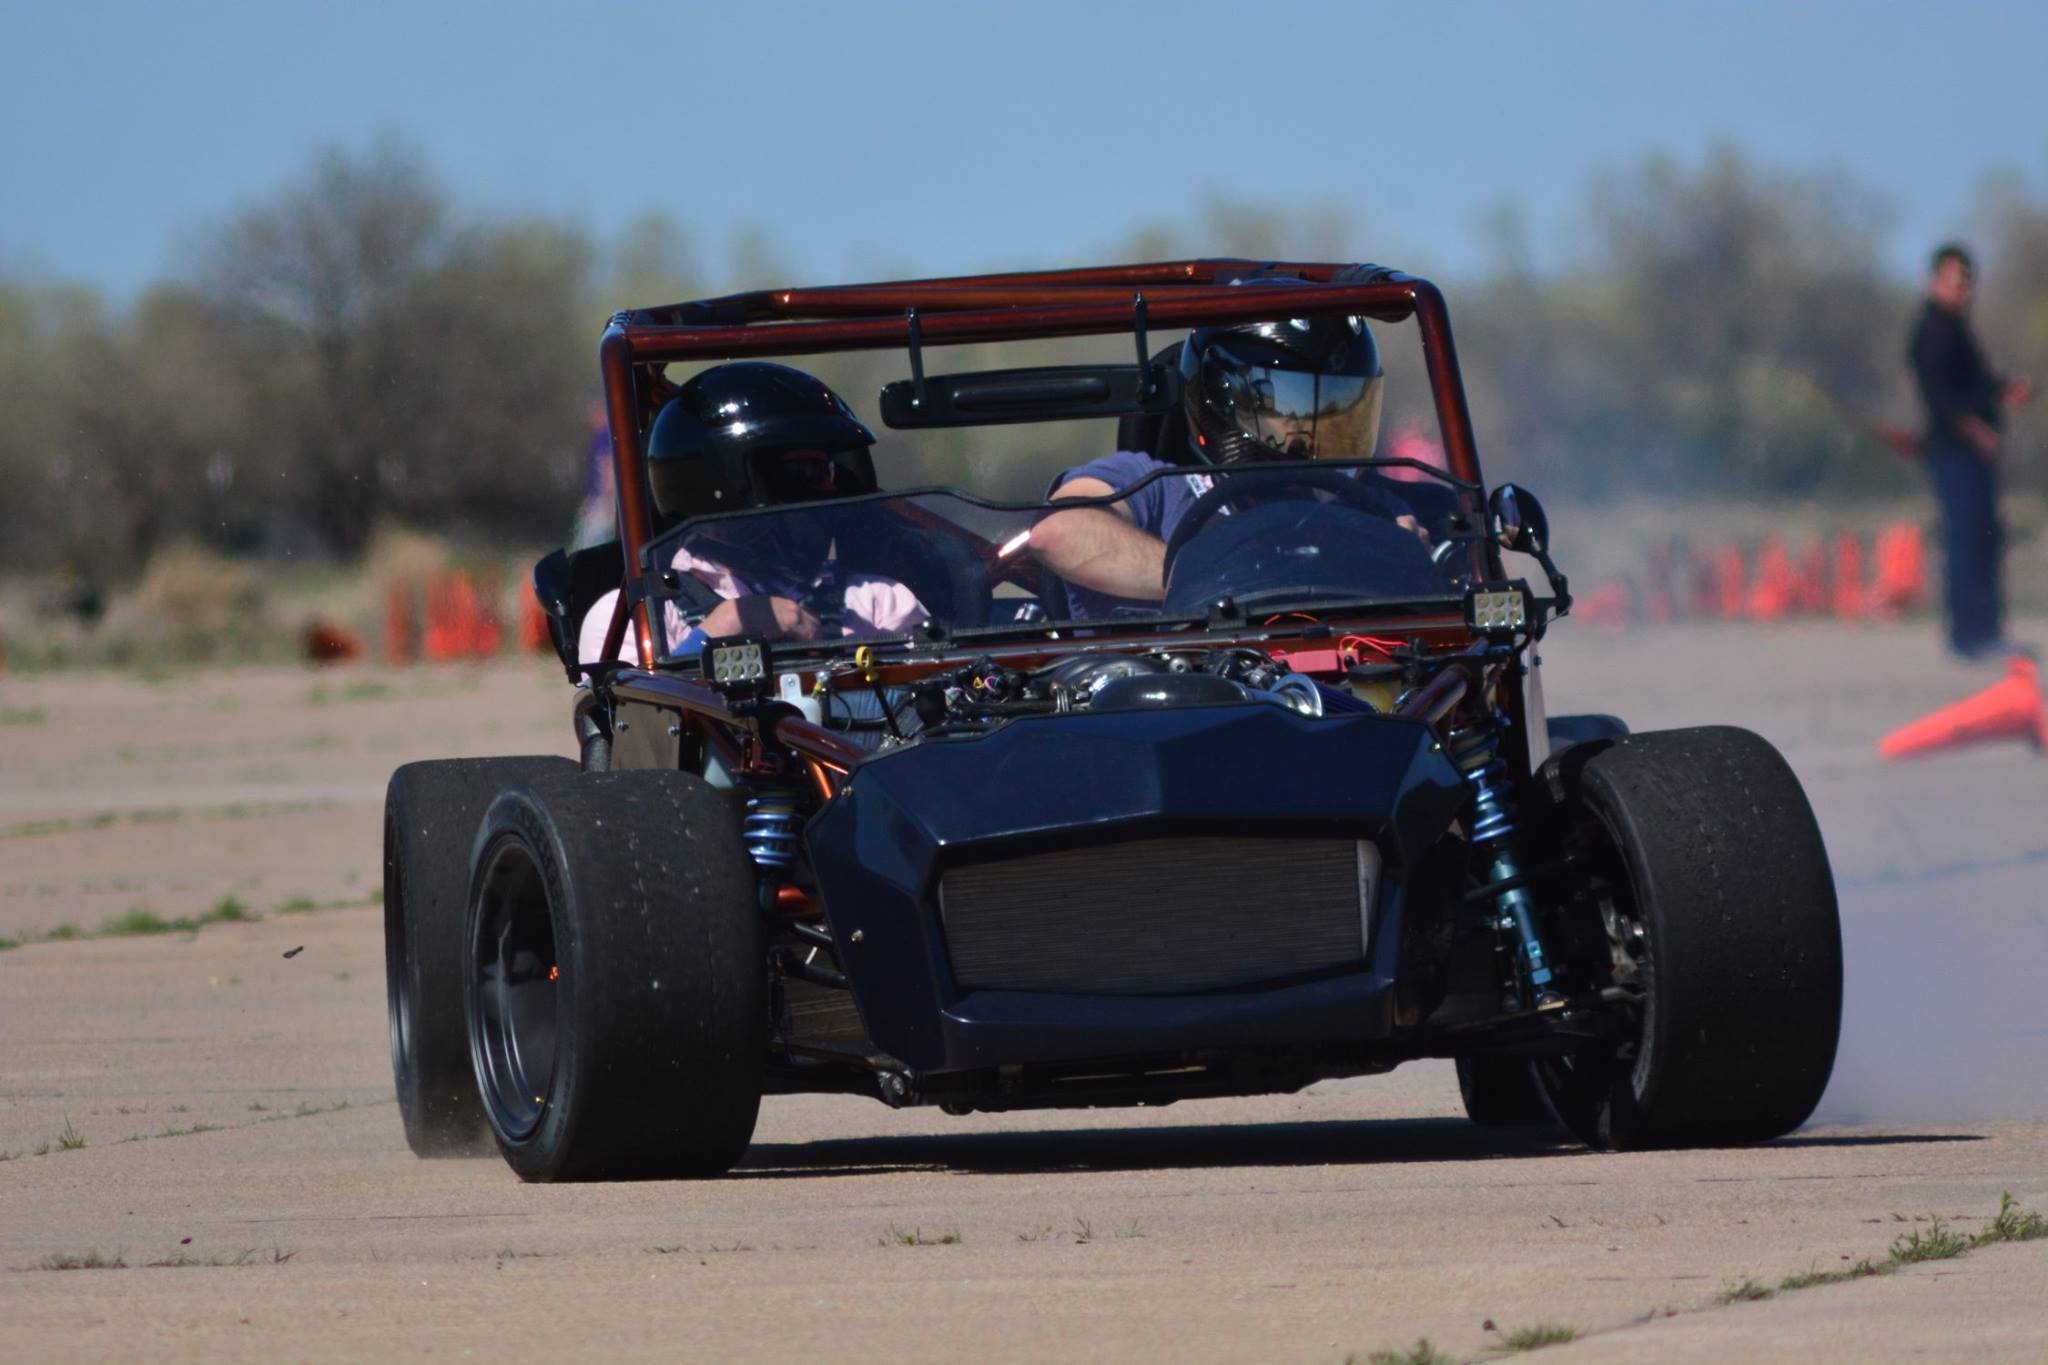 Tearing up the AutoCross scene!